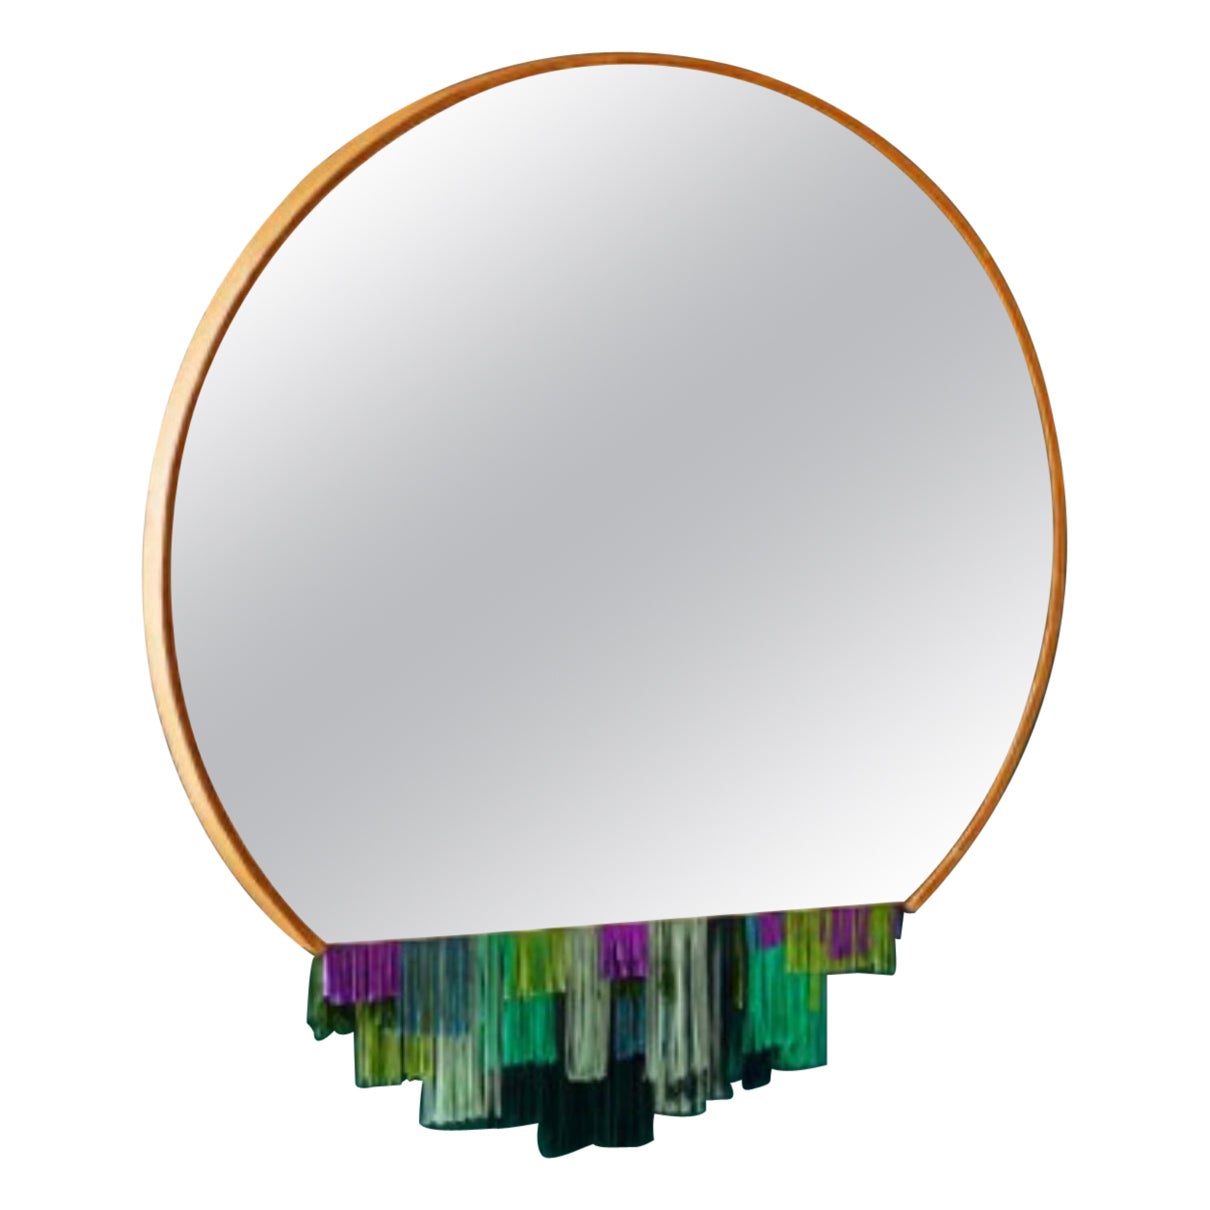 Fringe Mirror Green by Tero Kuitunen For Sale